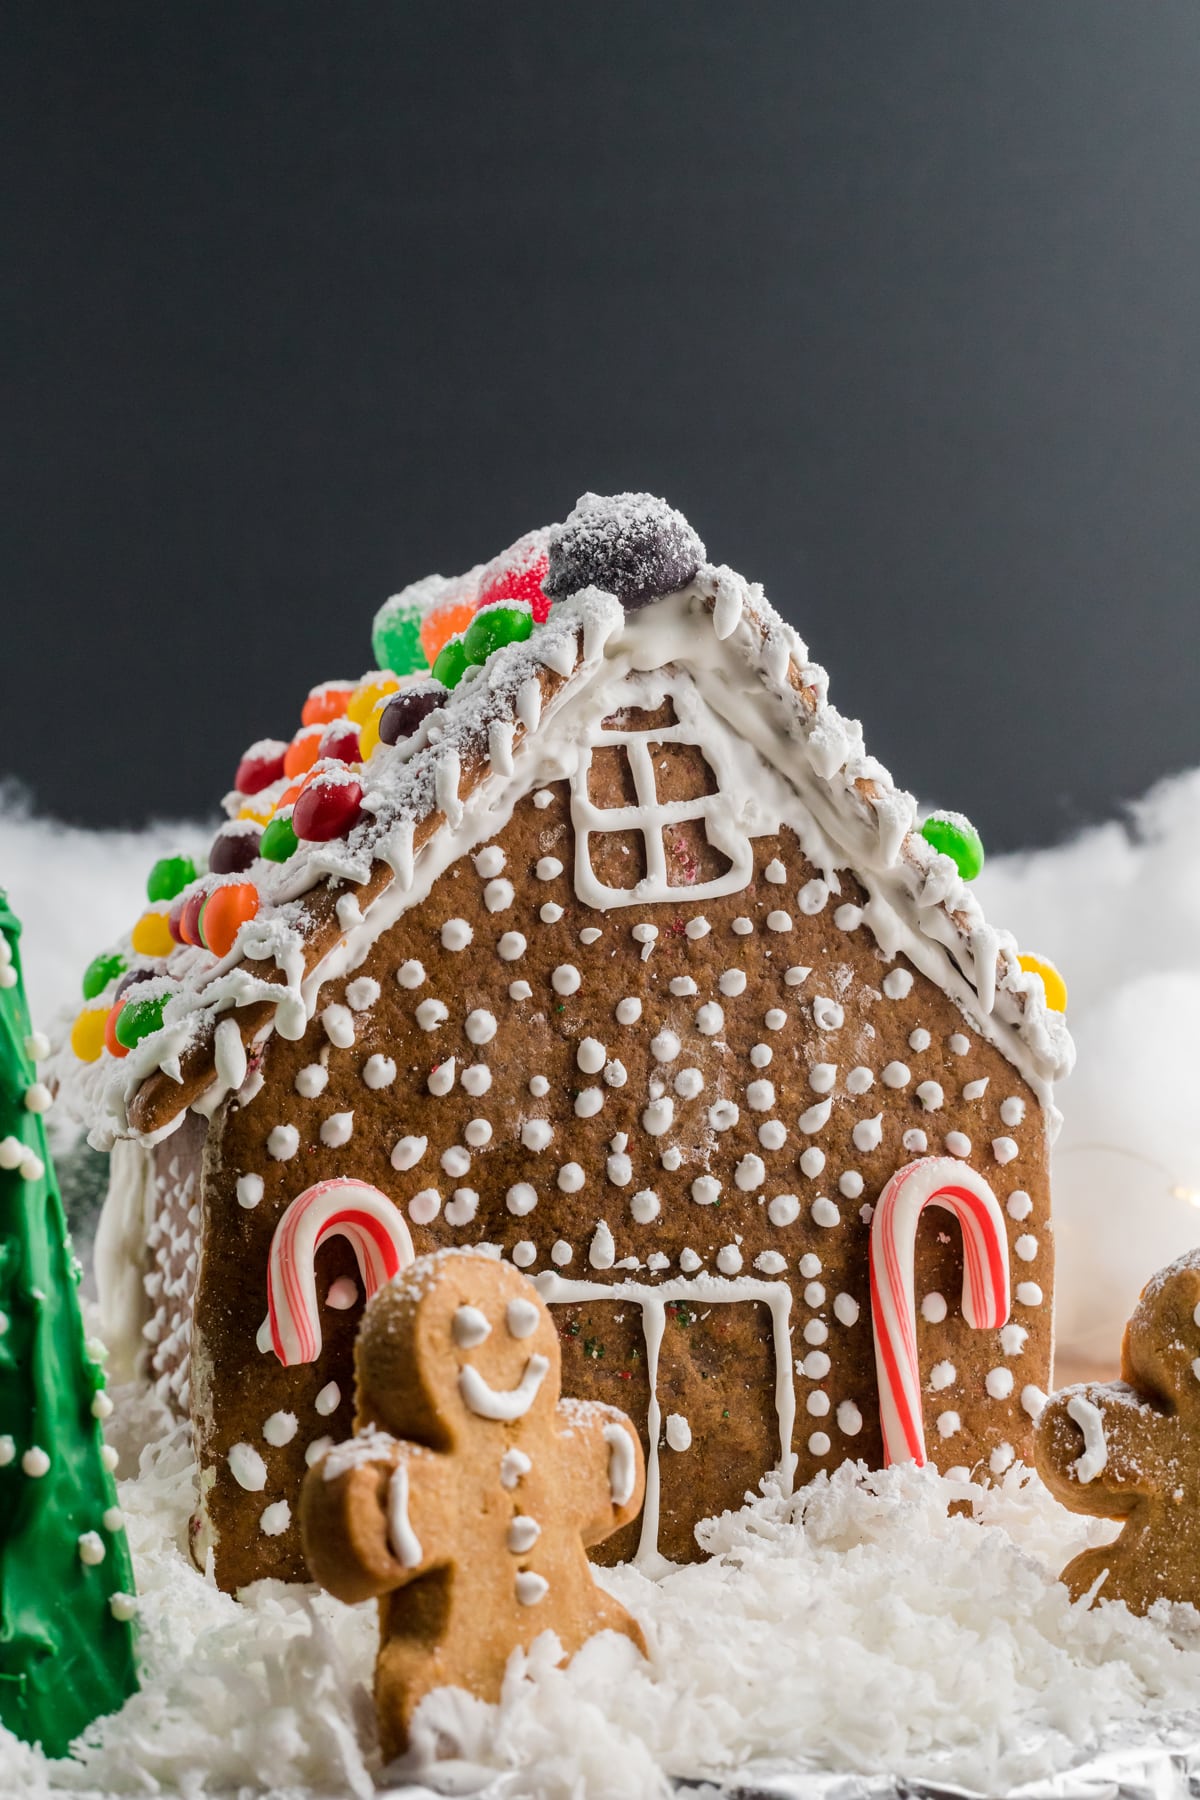 Decorated Gingerbread House with Gingerbread Men.